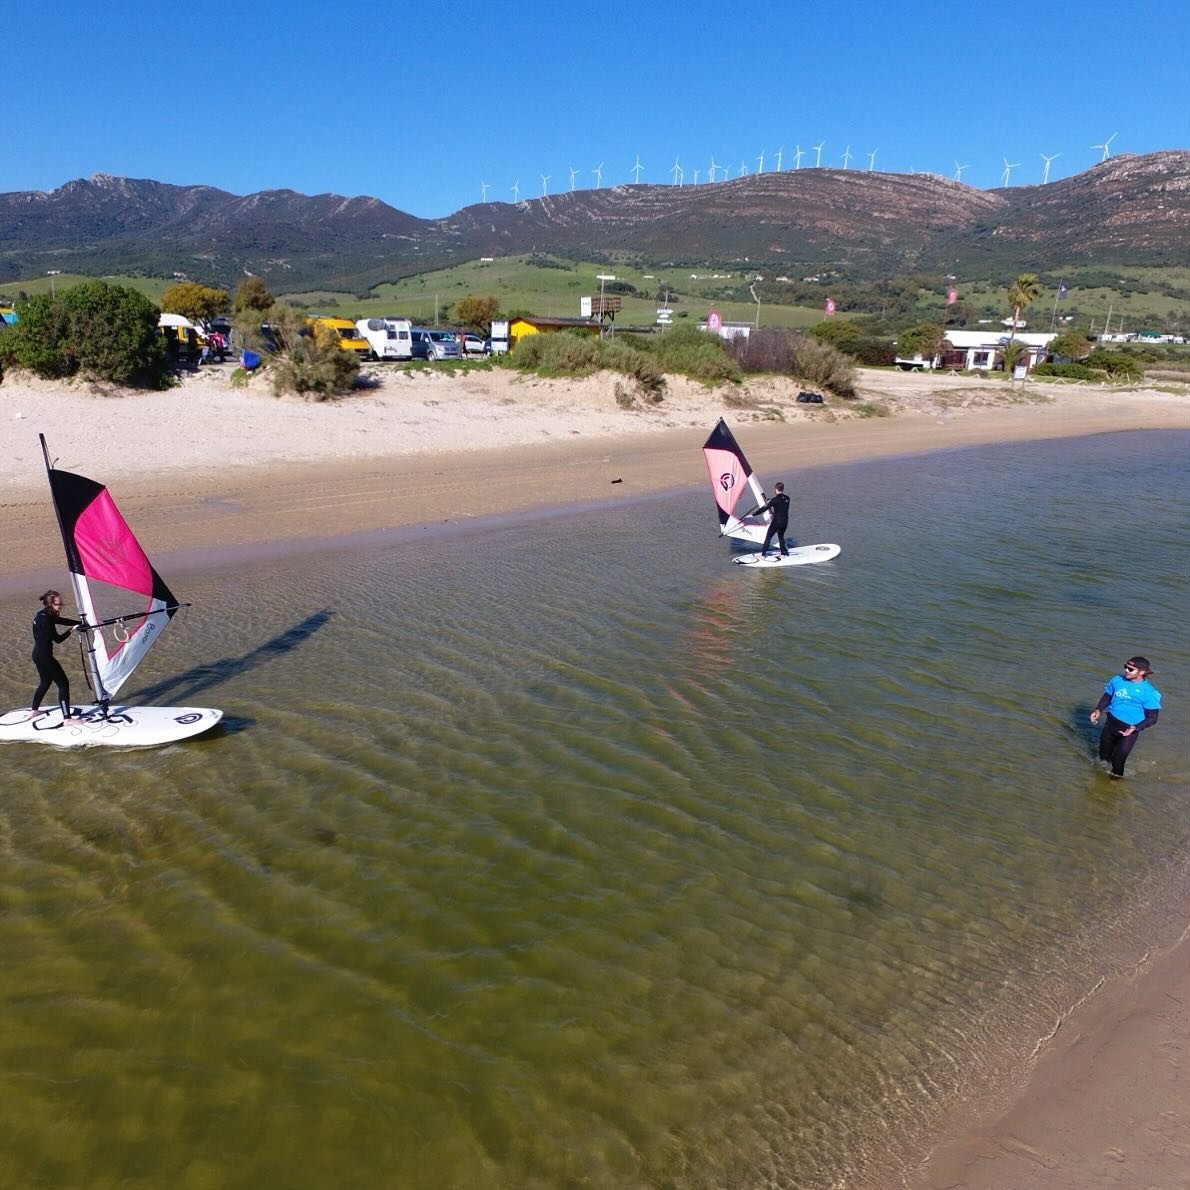 🇪🇸 No puedes dejar de aprovechar nuestra Laguna, ideal para los primeros pasos y para ni&ntilde;os .

🇬🇧 You can&rsquo;t miss the oportunity of the lagoon, perfect for first steps and for the kids.

#windsurfing
#tarifa
#nomadbasetarifa 
#beach
#